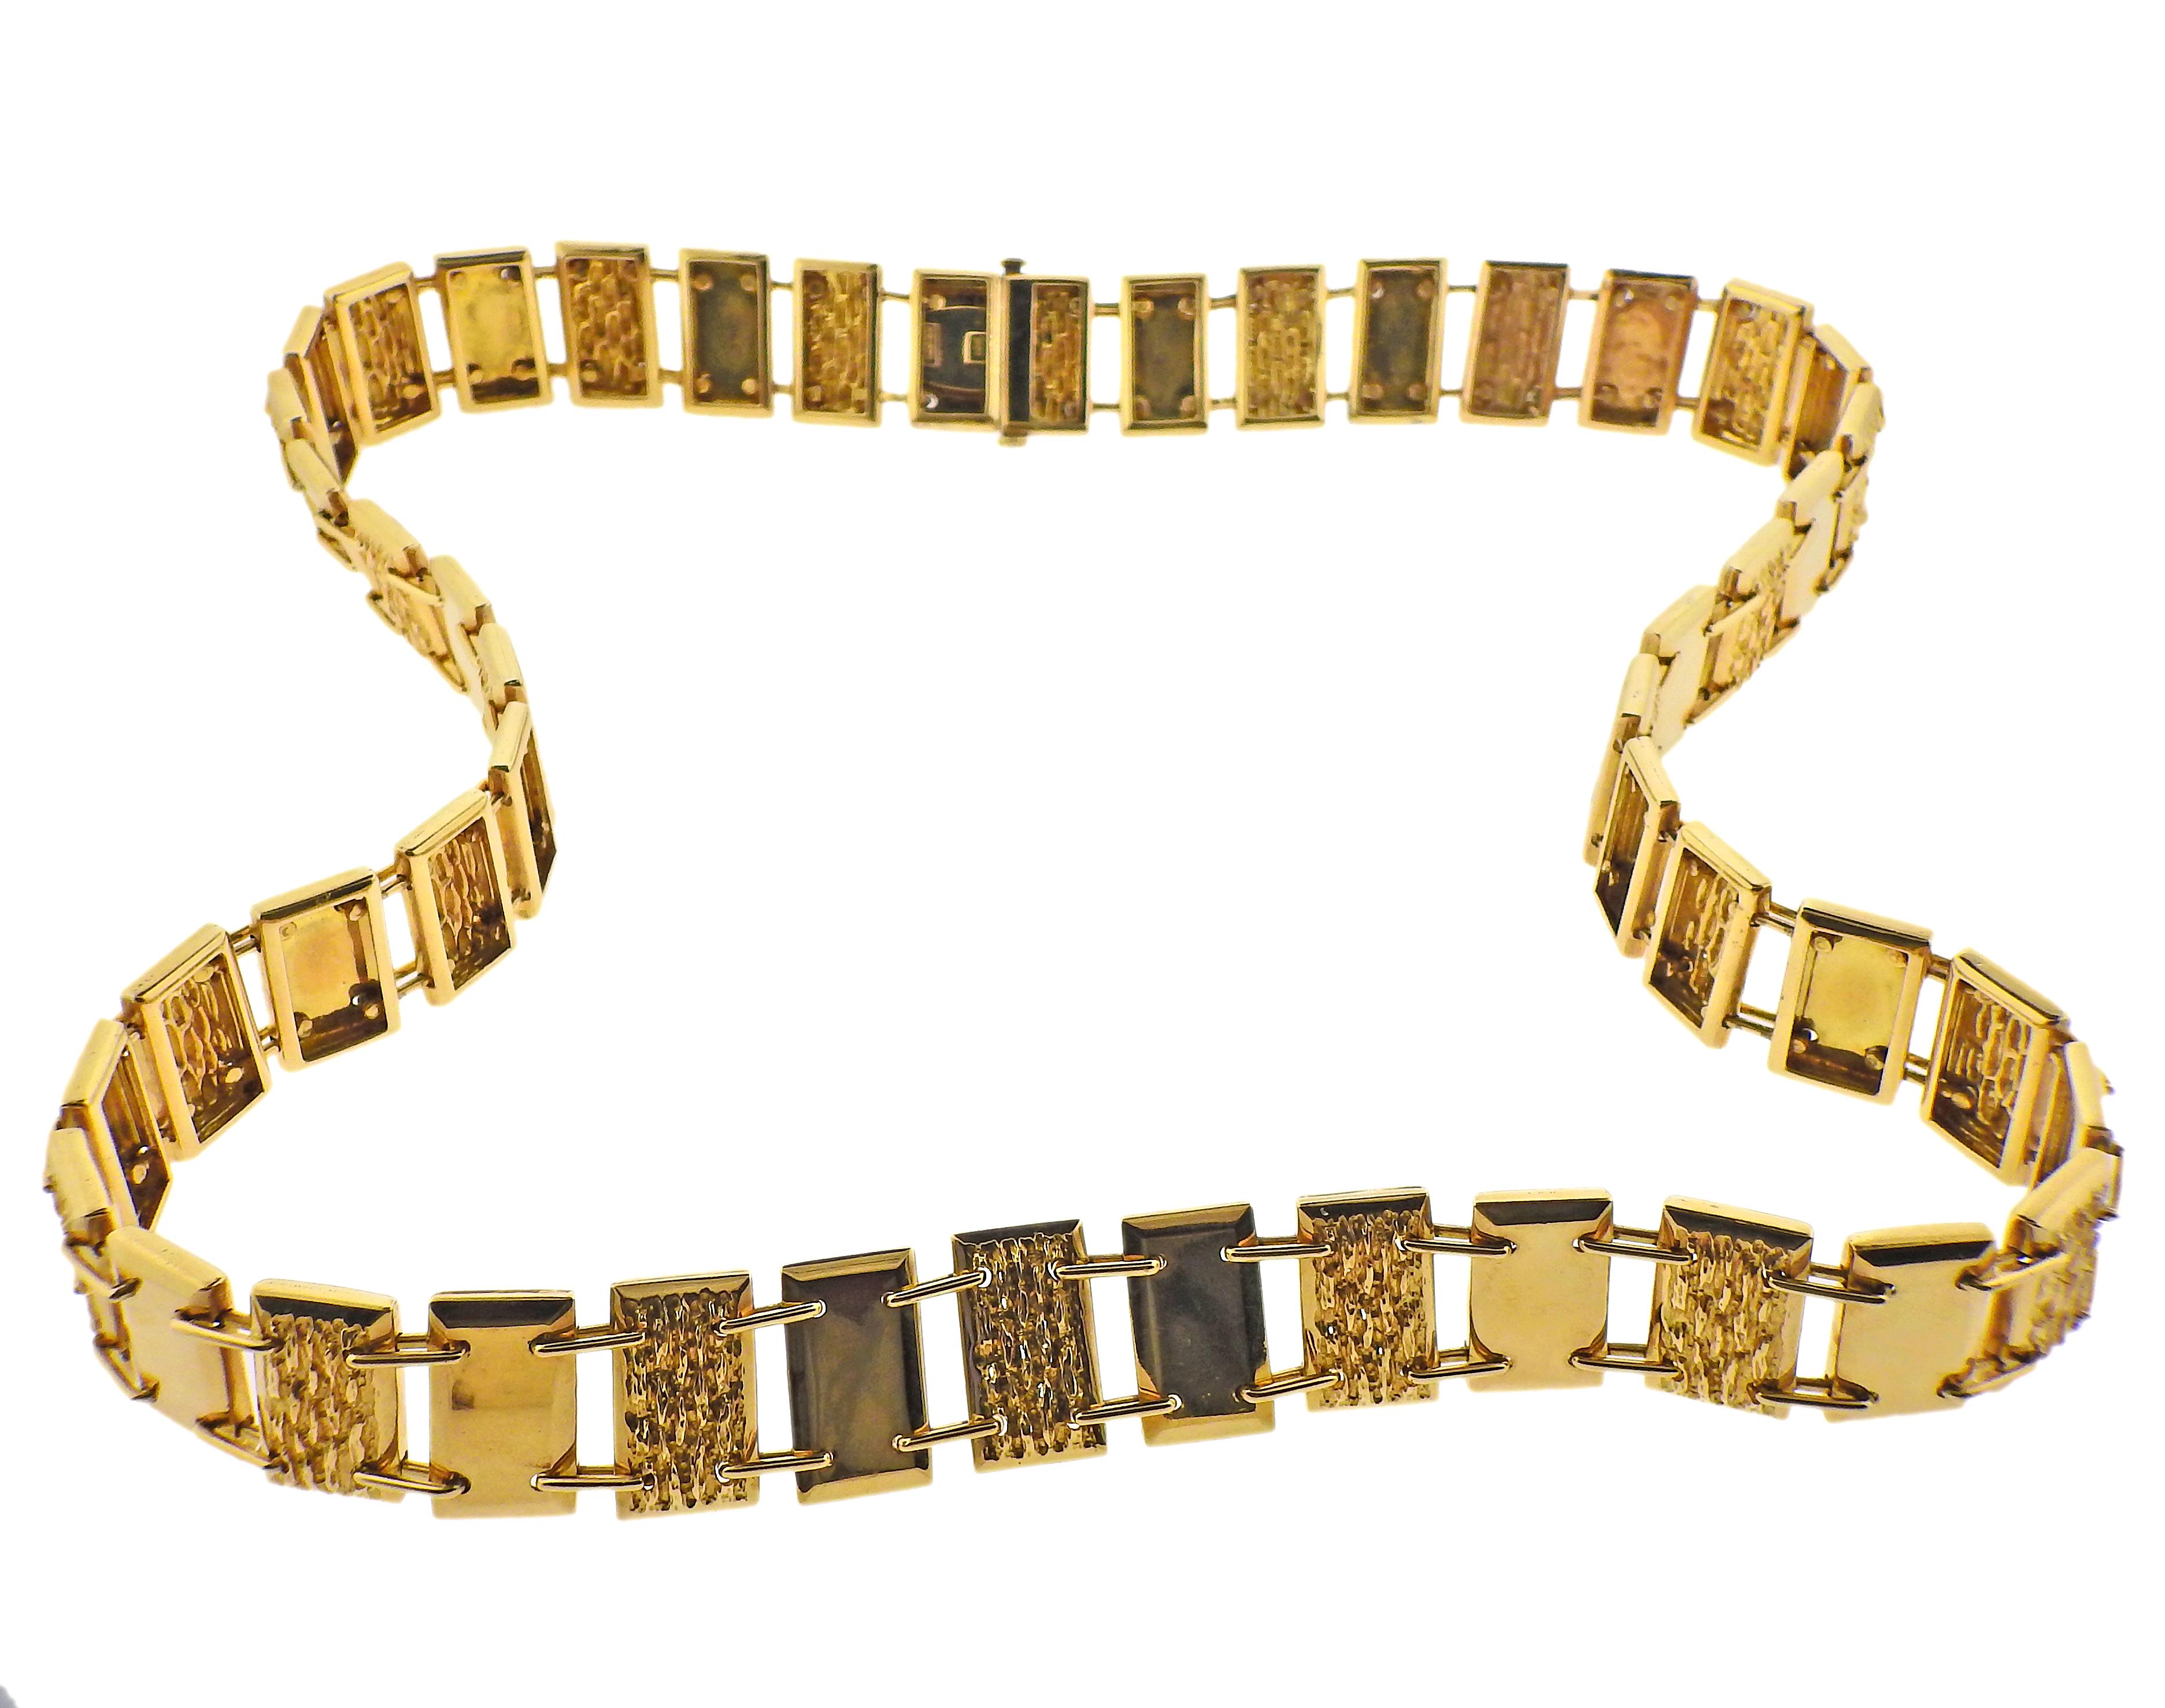 Impressive vintage Cartier 18k gold necklace (can be worn as a belt), featuring rectangular links, alternating textured and polished gold. Necklace is 31